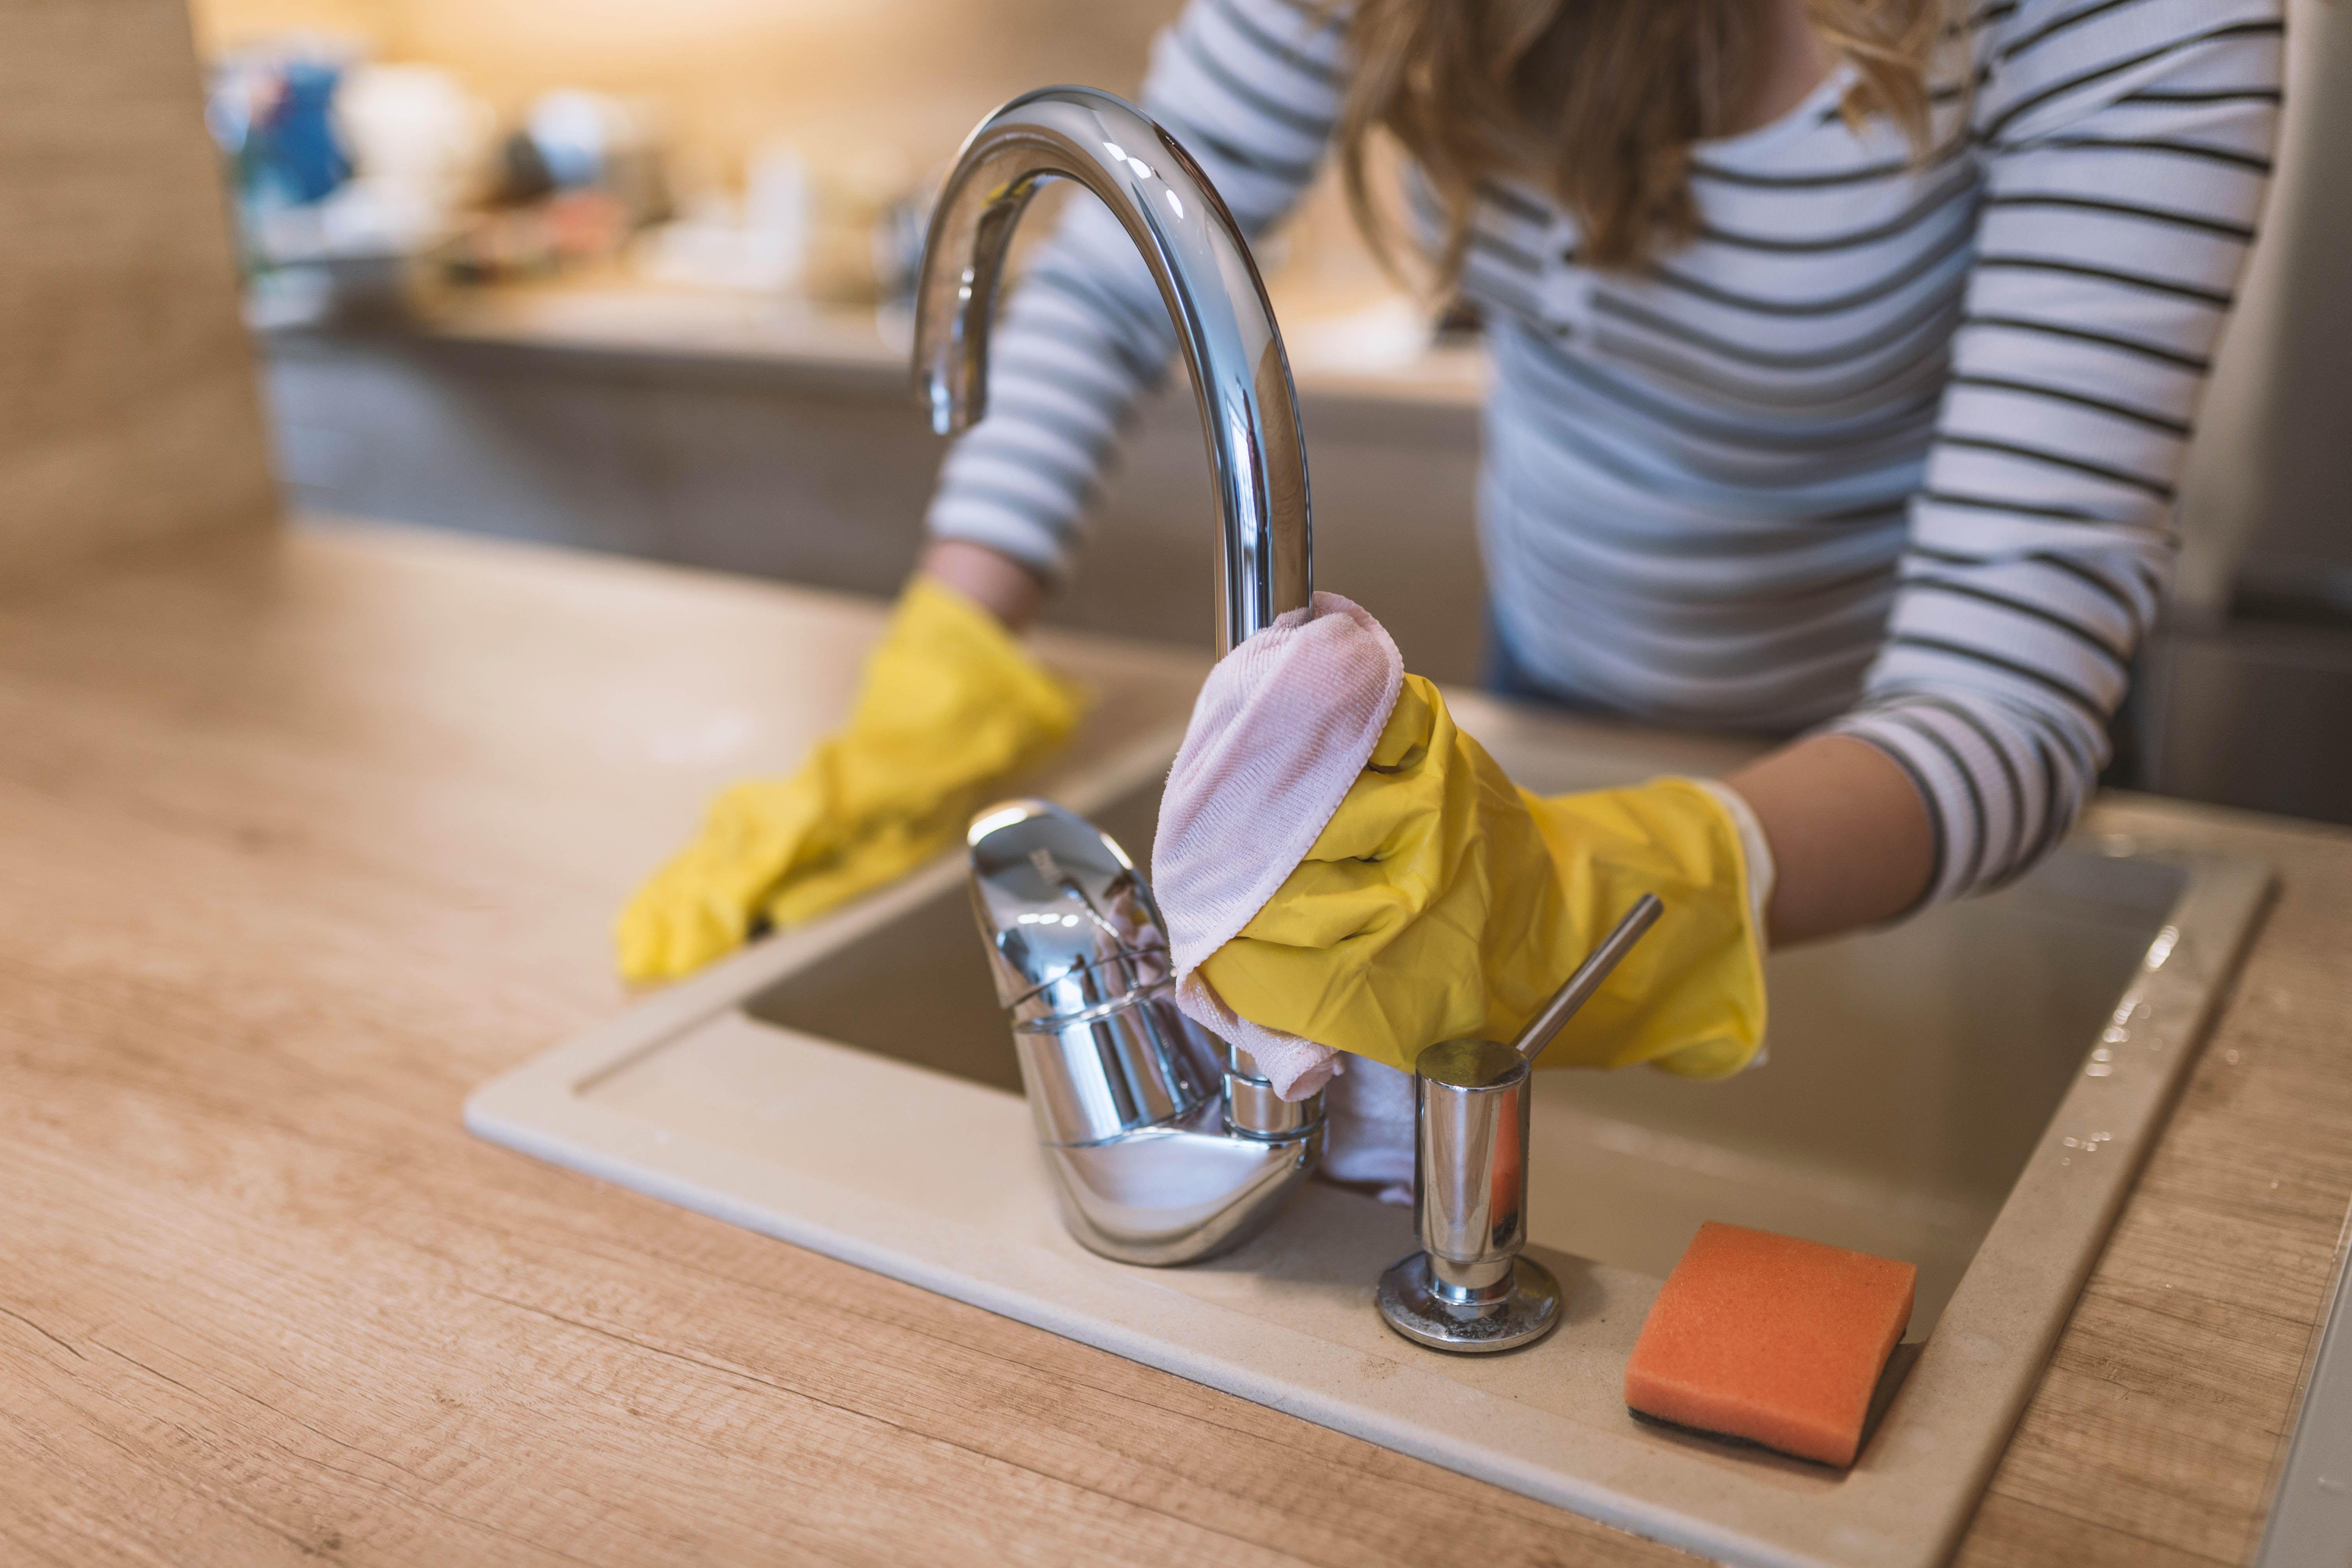 housekeeping-checklist-kitchen-wiping-the-tap-sink-rubber-gloves